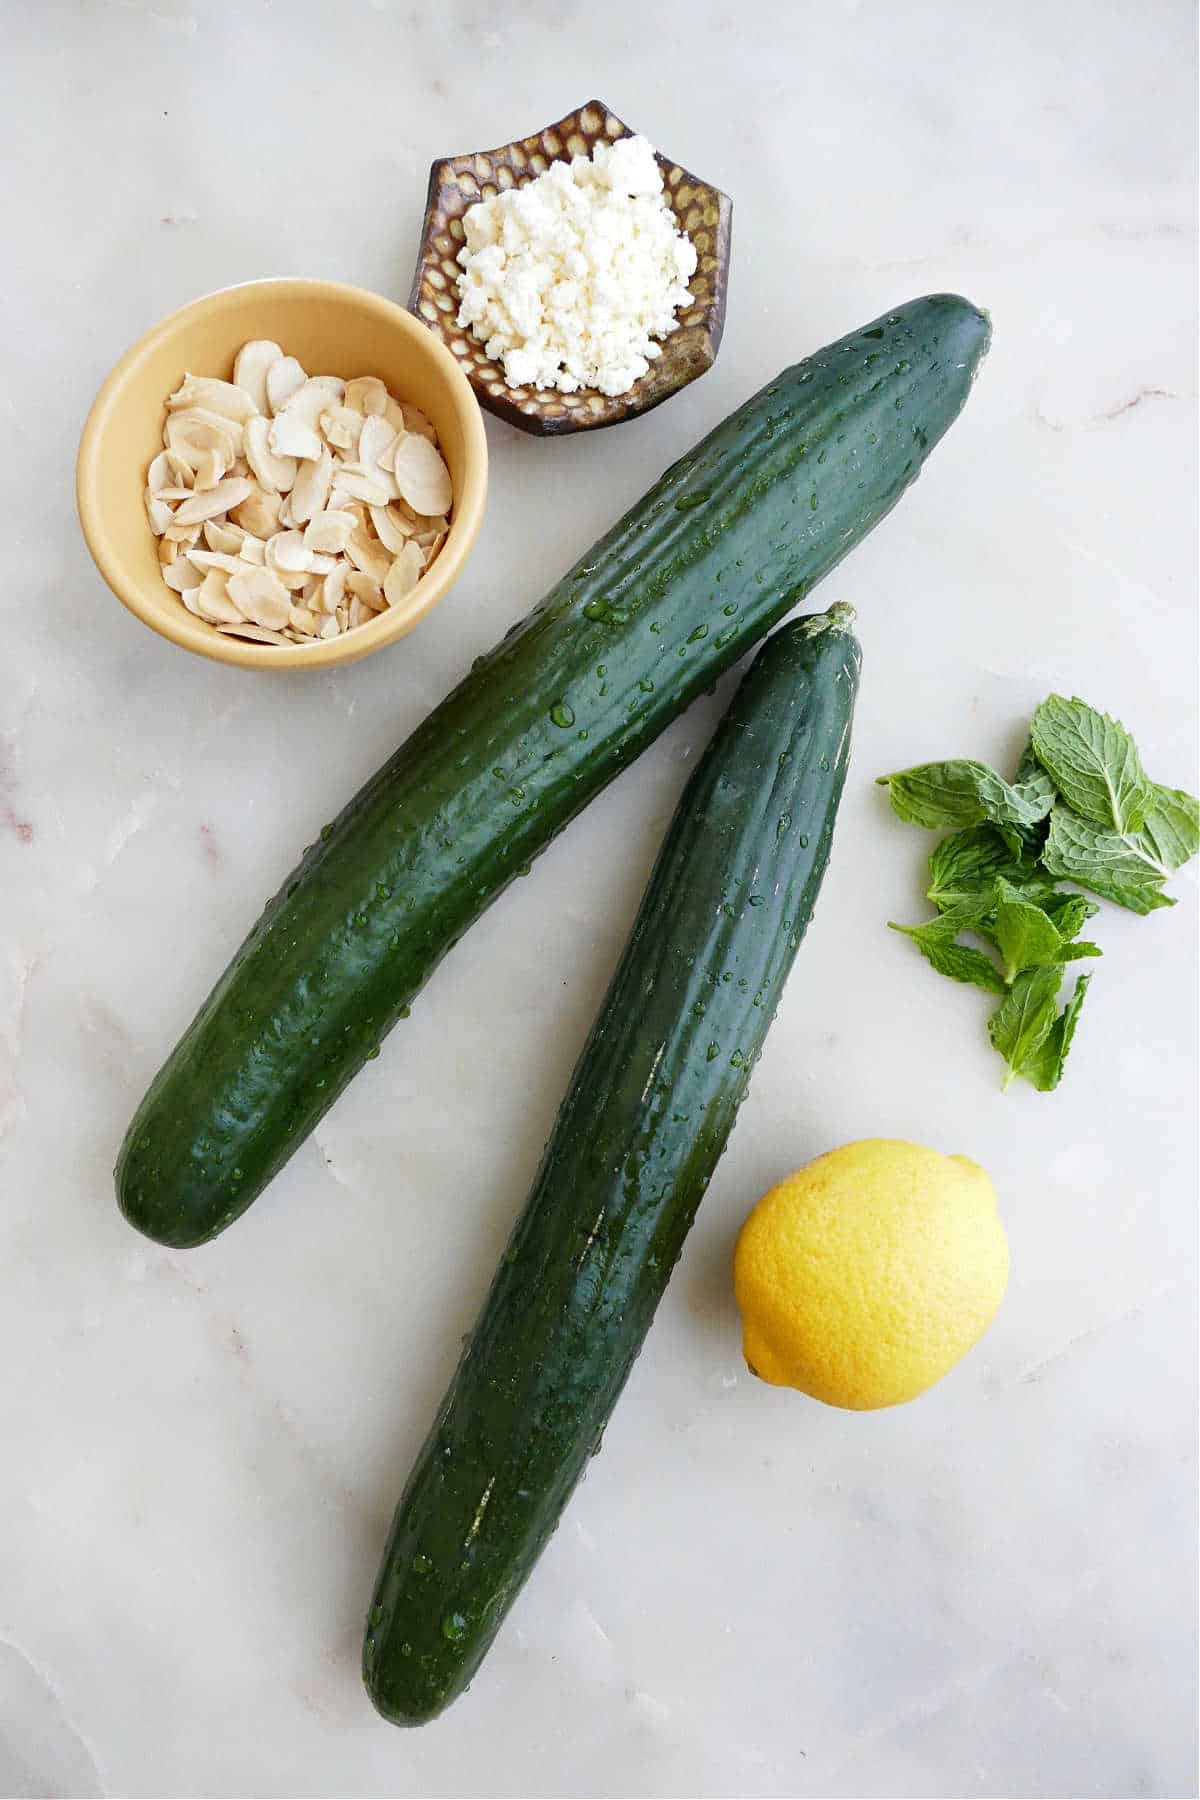 two cucumbers, a lemon, mint leaves, sliced almonds, and feta cheese on a counter